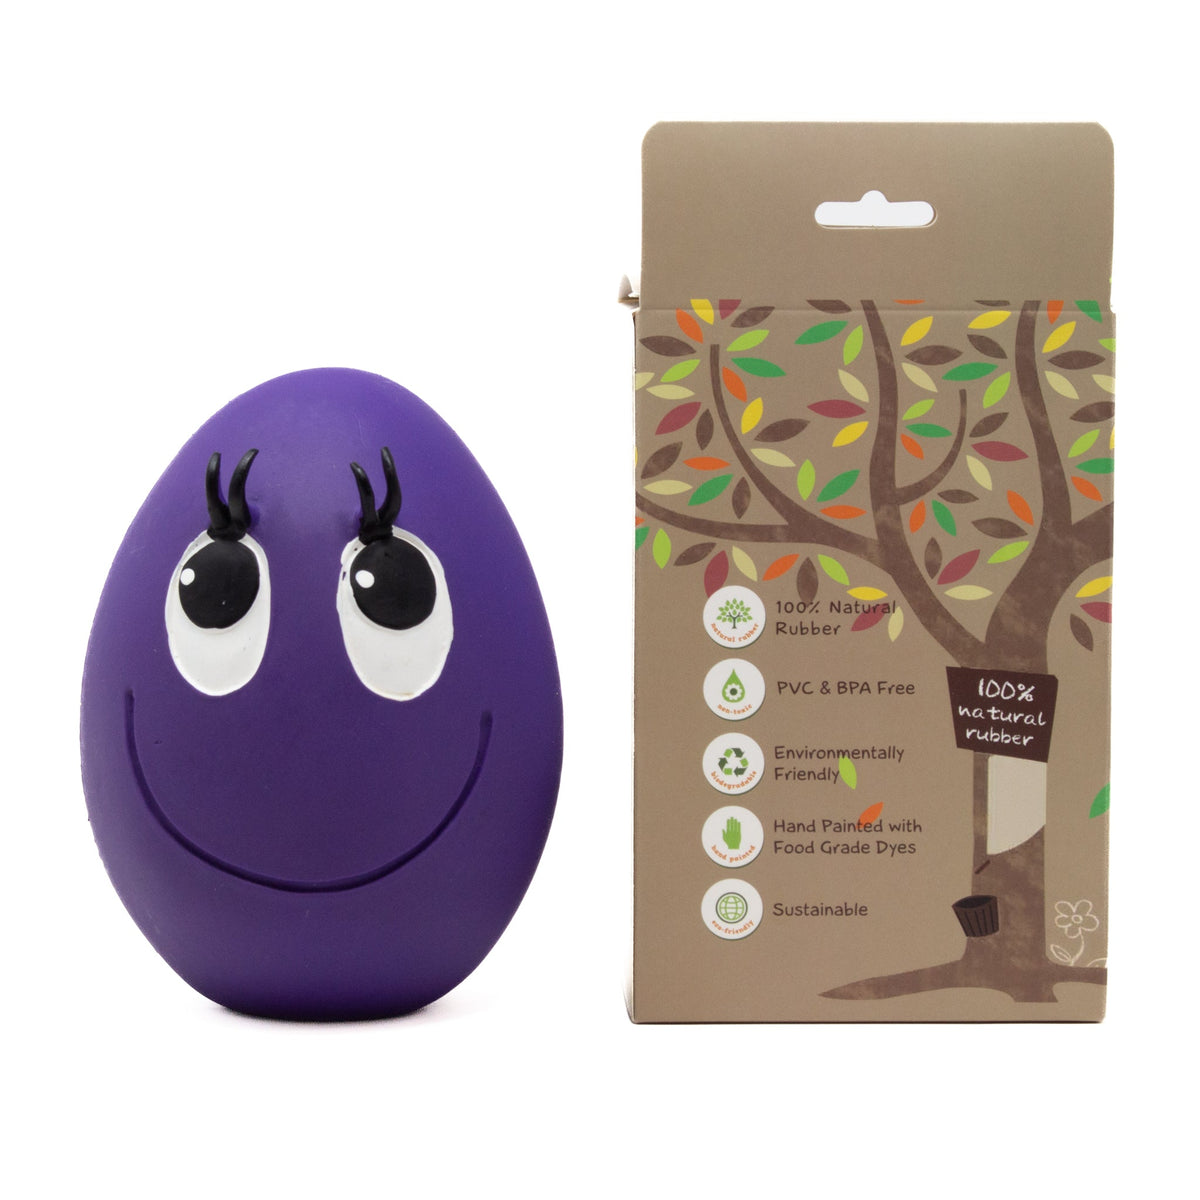 XXL OVO the Egg PURPLE - Natural Rubber Toys